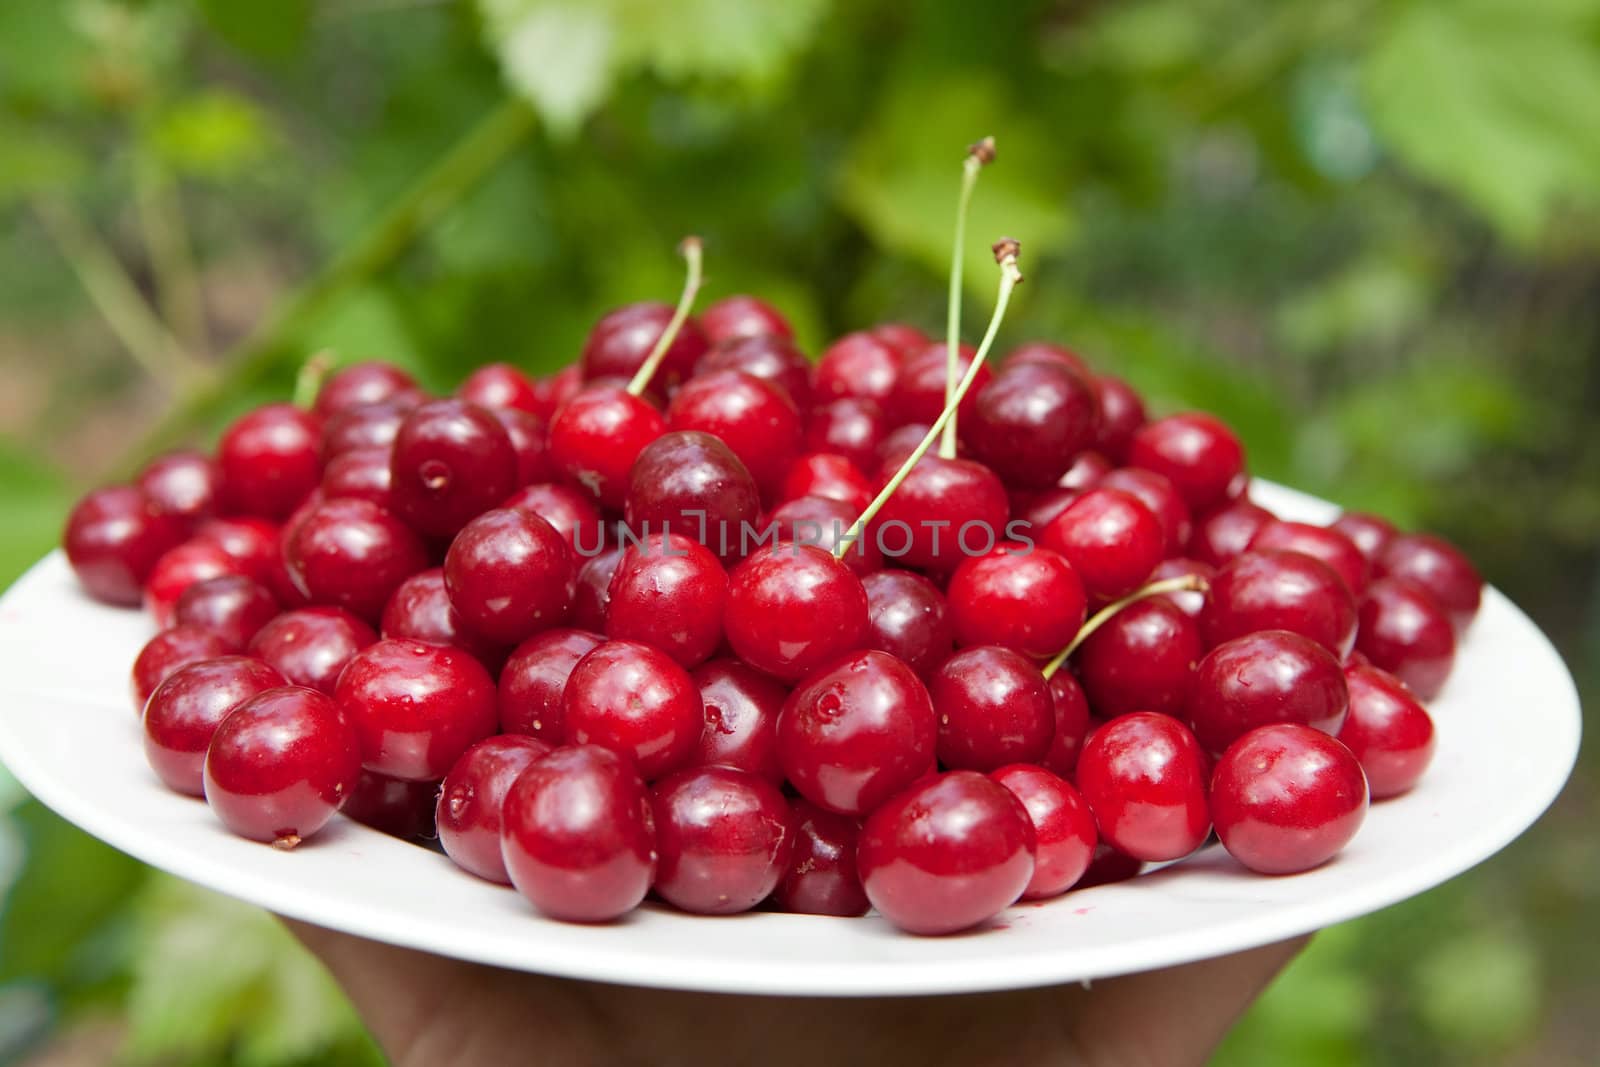 tasty cherries on the plate outdoors

